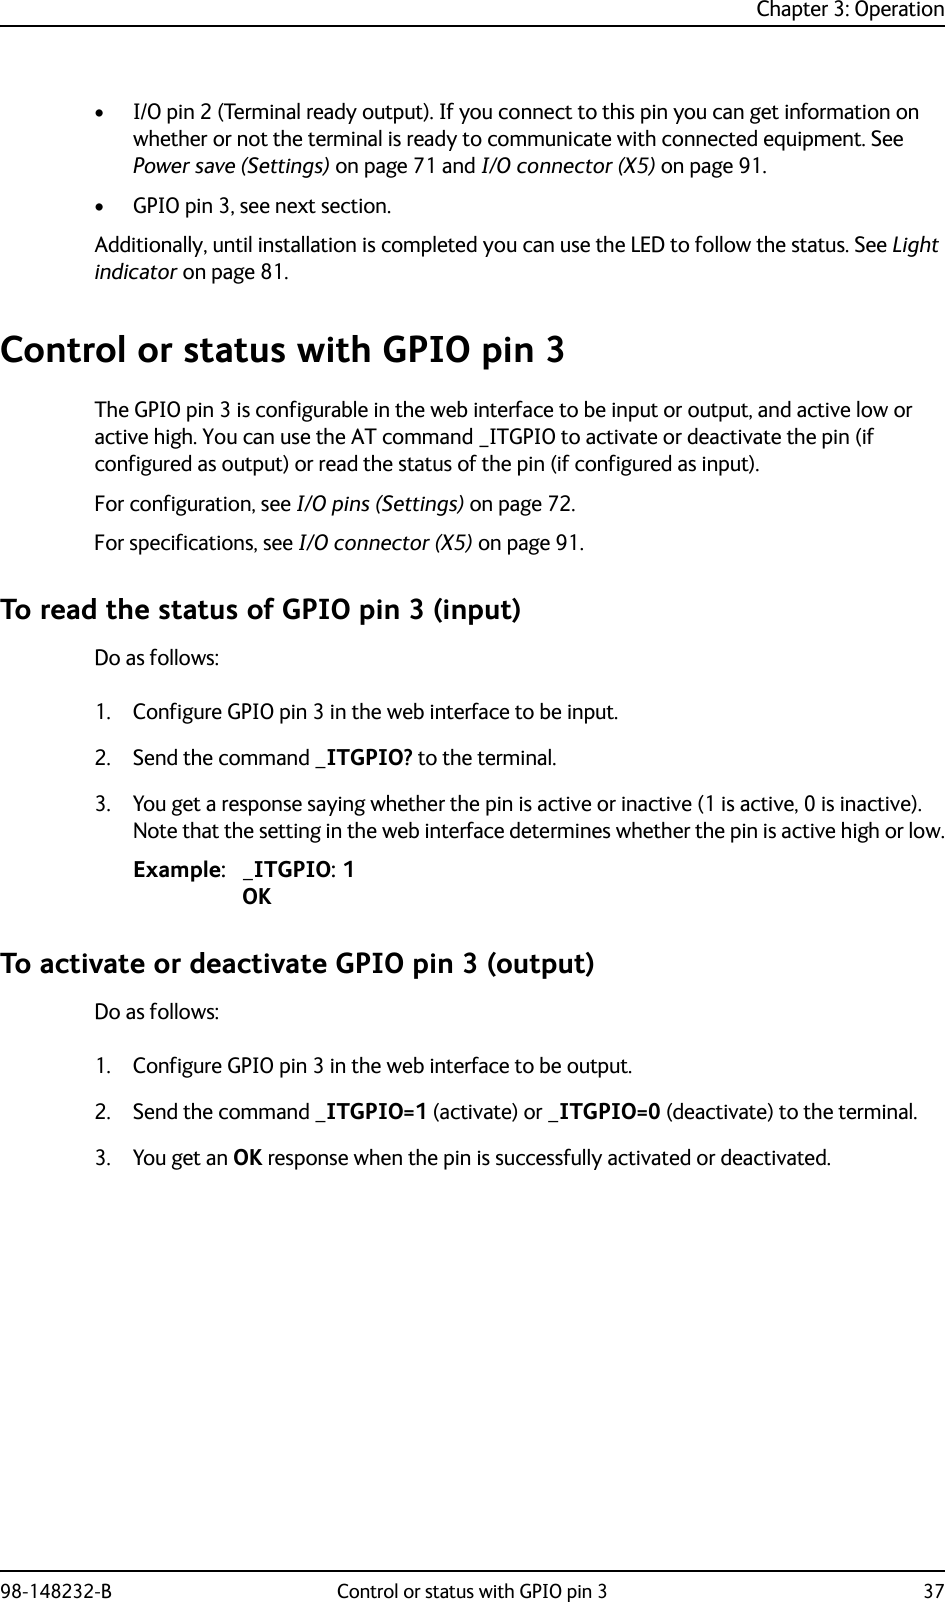 Chapter 3: Operation98-148232-B Control or status with GPIO pin 3 37• I/O pin 2 (Terminal ready output). If you connect to this pin you can get information on whether or not the terminal is ready to communicate with connected equipment. See Power save (Settings) on page 71 and I/O connector (X5) on page 91.• GPIO pin 3, see next section.Additionally, until installation is completed you can use the LED to follow the status. See Light indicator on page 81.Control or status with GPIO pin 3The GPIO pin 3 is configurable in the web interface to be input or output, and active low or active high. You can use the AT command _ITGPIO to activate or deactivate the pin (if configured as output) or read the status of the pin (if configured as input).For configuration, see I/O pins (Settings) on page 72.For specifications, see I/O connector (X5) on page 91.To read the status of GPIO pin 3 (input)Do as follows:1. Configure GPIO pin 3 in the web interface to be input.2. Send the command _ITGPIO? to the terminal.3. You get a response saying whether the pin is active or inactive (1 is active, 0 is inactive). Note that the setting in the web interface determines whether the pin is active high or low.Example: _ITGPIO: 1OKTo activate or deactivate GPIO pin 3 (output)Do as follows:1. Configure GPIO pin 3 in the web interface to be output.2. Send the command _ITGPIO=1 (activate) or _ITGPIO=0 (deactivate) to the terminal.3. You get an OK response when the pin is successfully activated or deactivated.